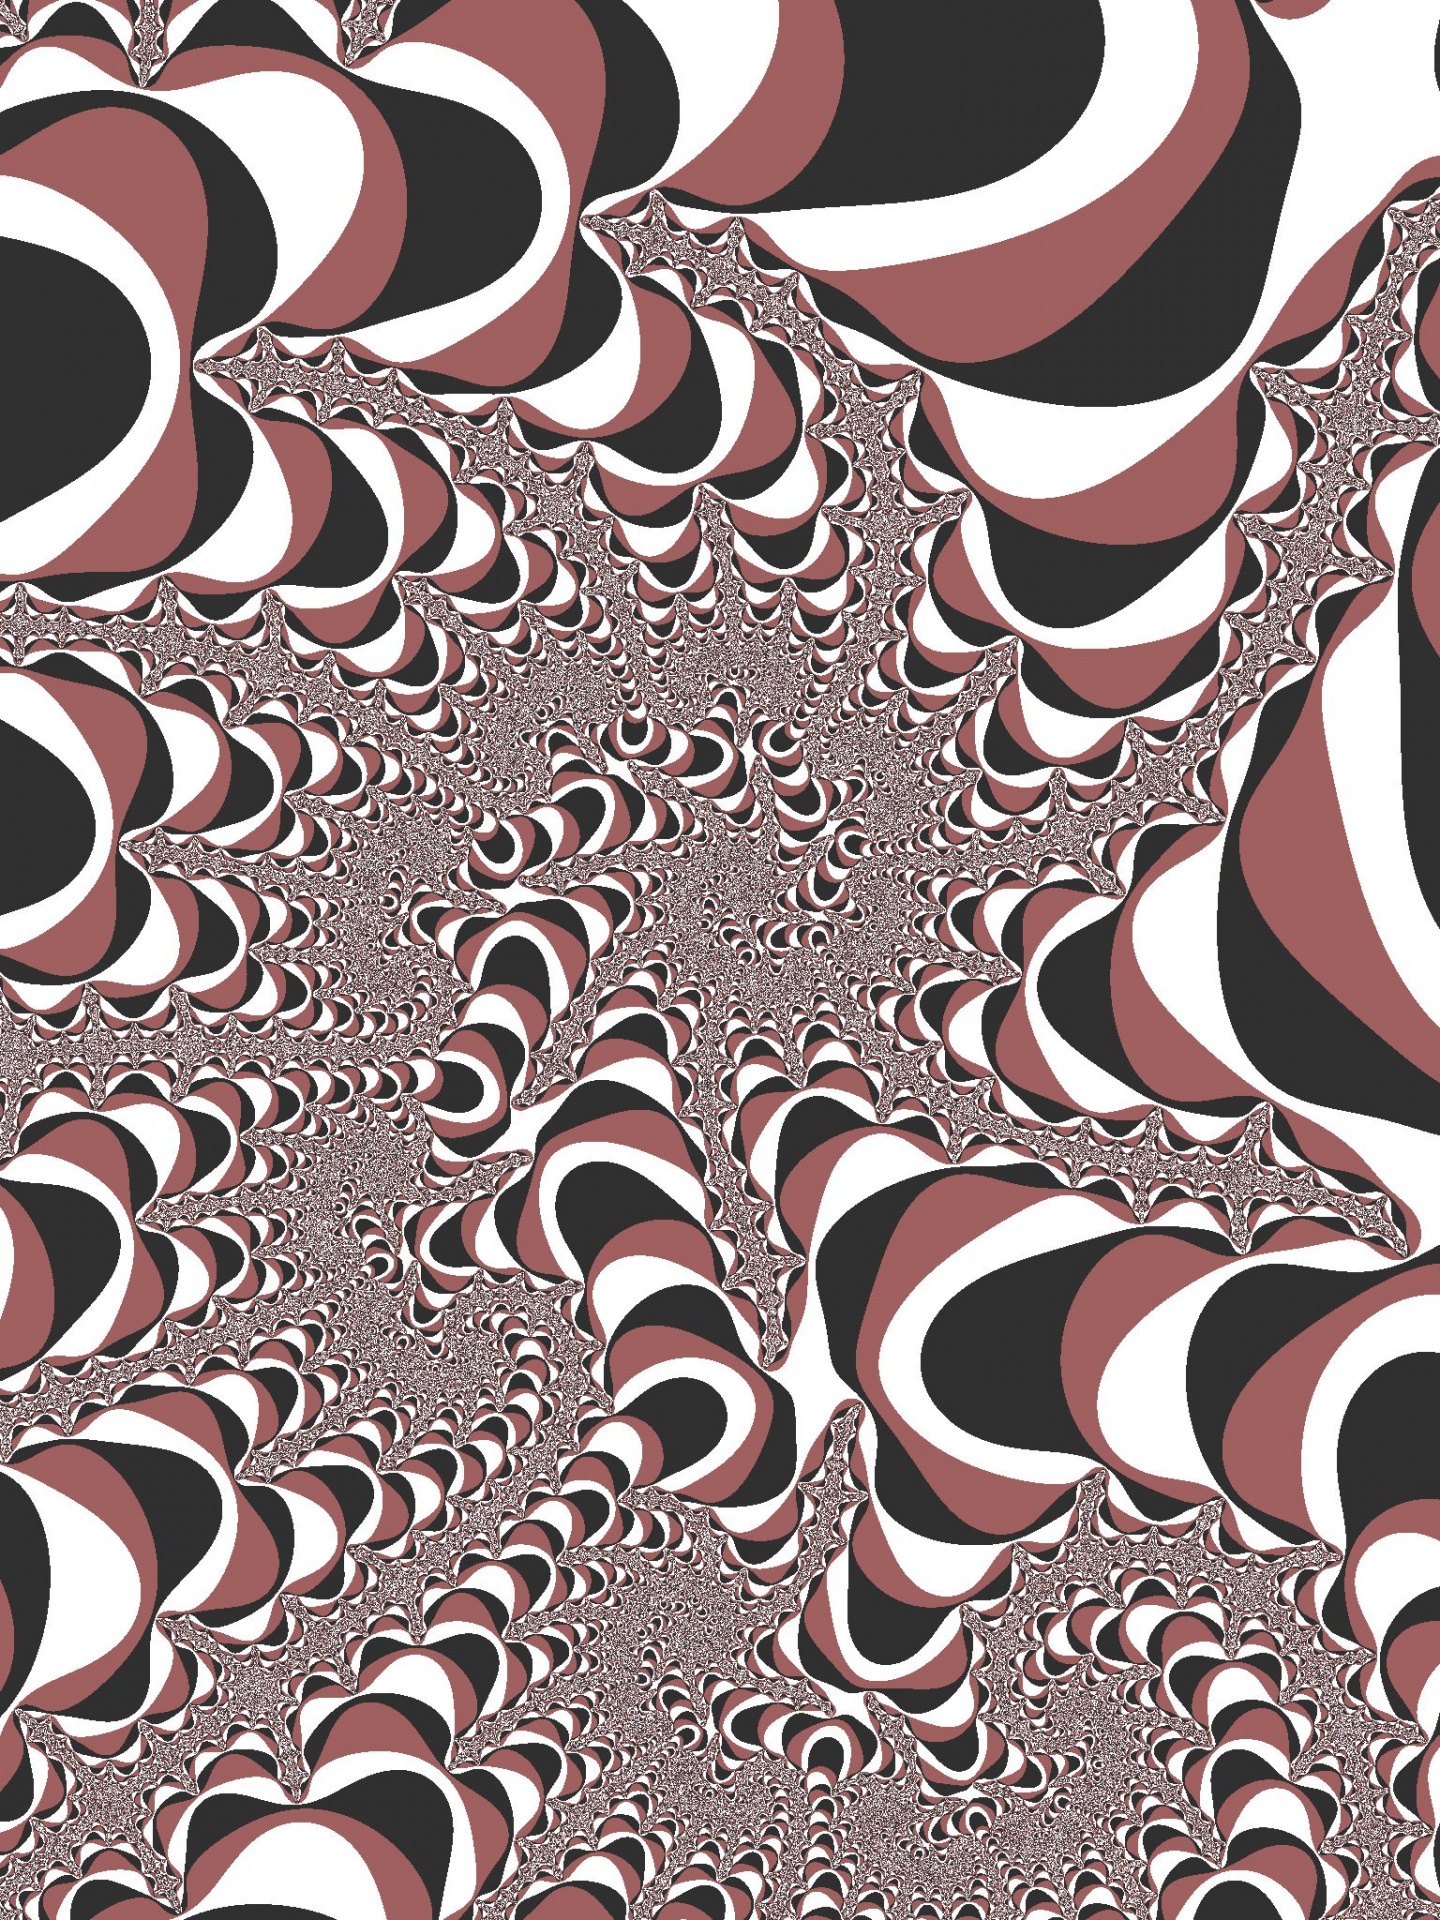 Fractal Pattern In A Brown Colors